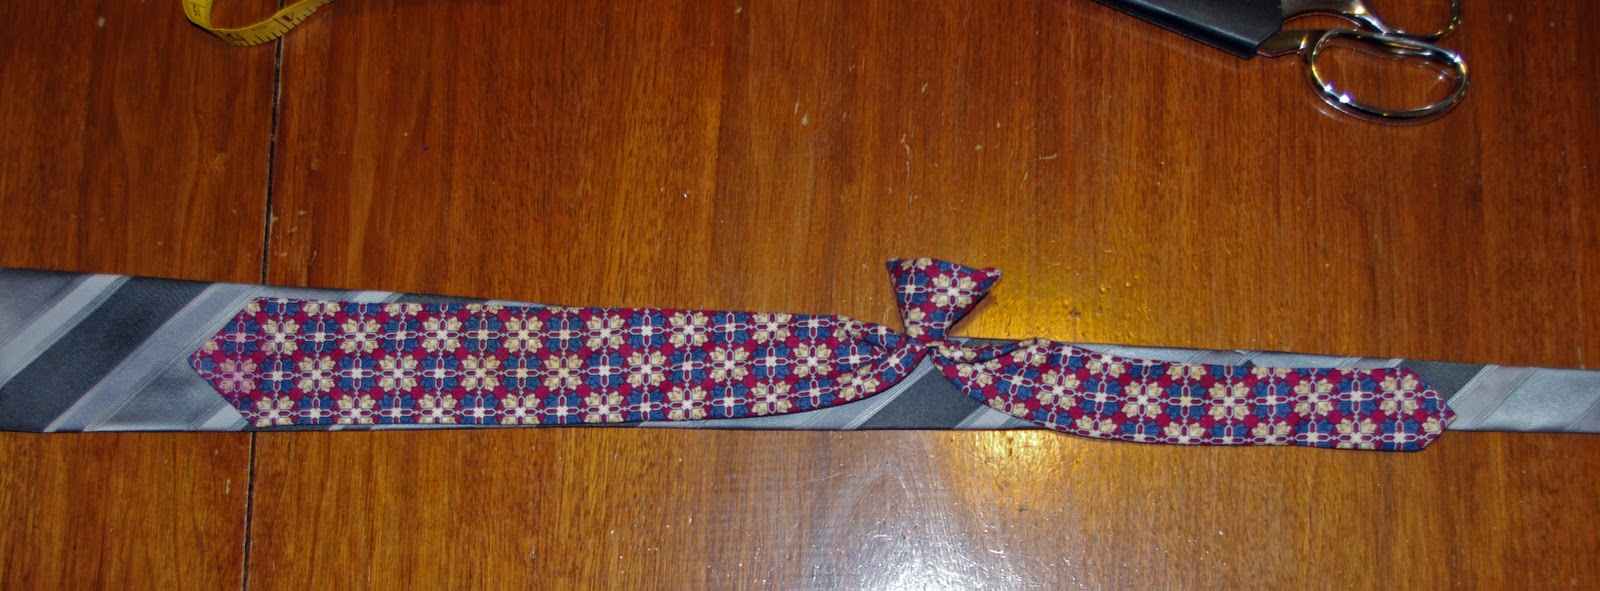 SquigglyTwigs Designs: Tuesday's Tute: Upcycled Tie for a Little Guy